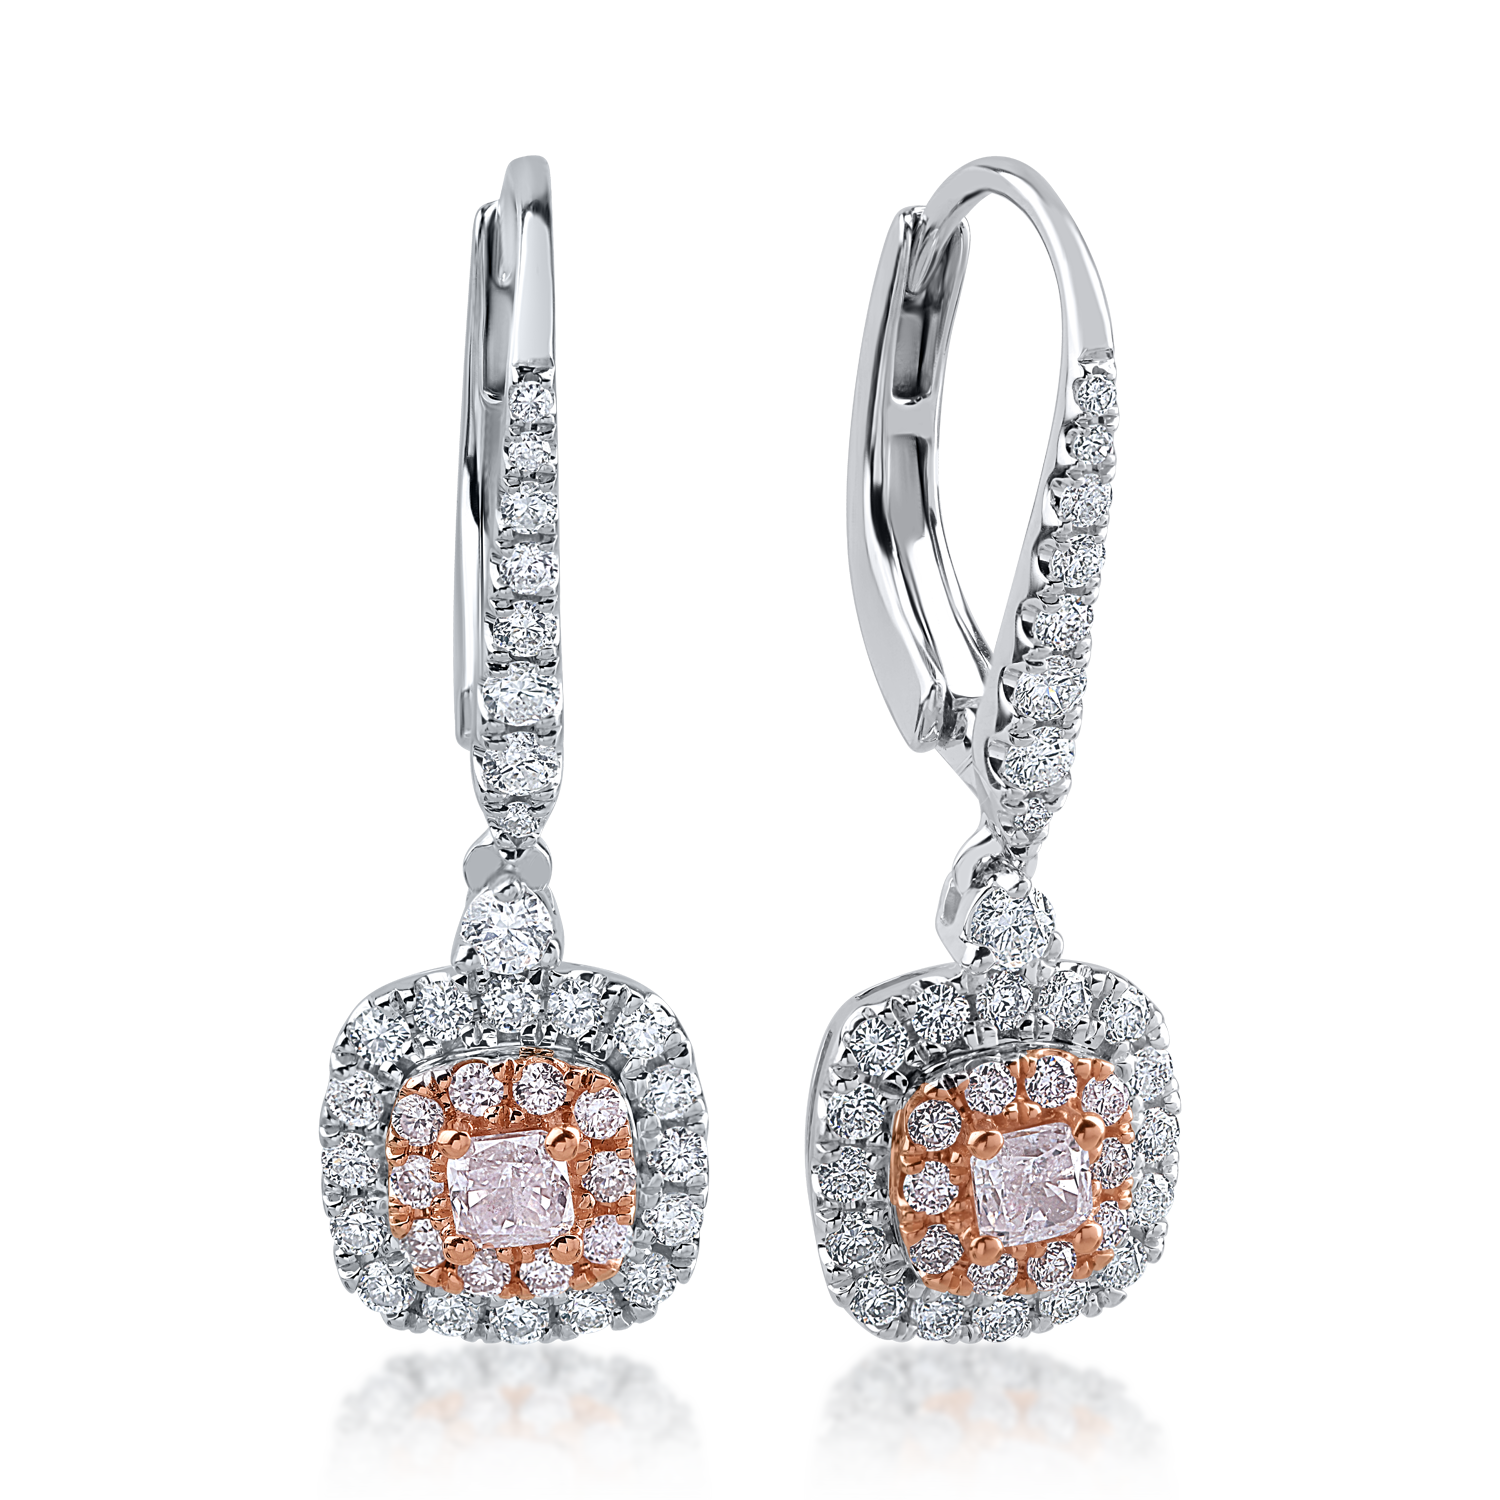 White-rose gold earrings with 0.55ct clear diamonds and 0.36ct rose diamonds